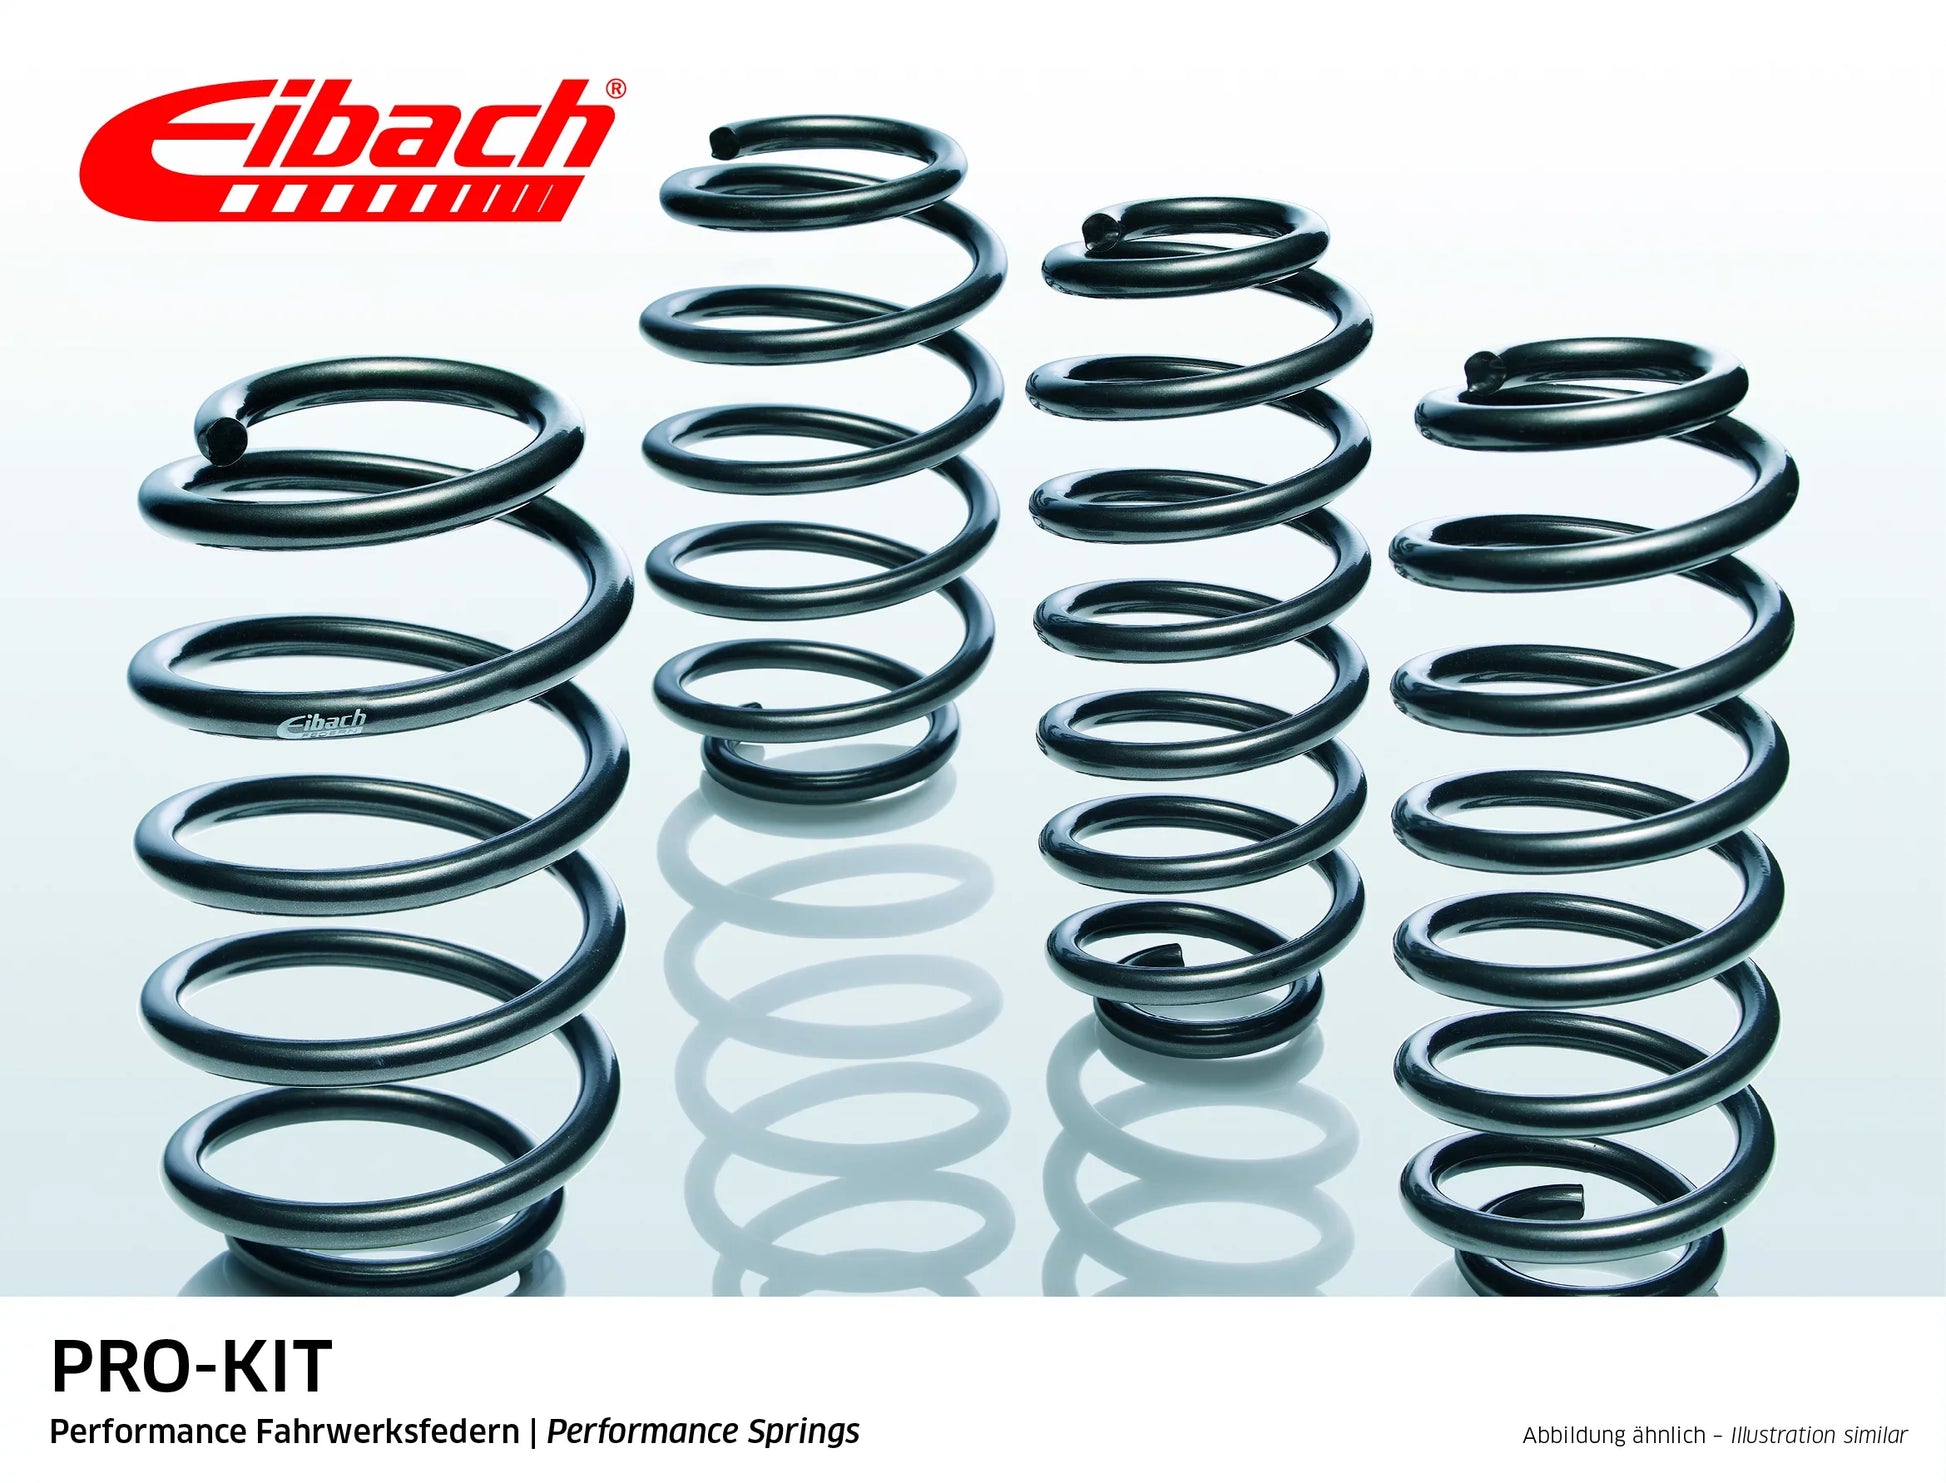 Eibach Pro-Kit Lowering Springs (E10-79-001-05-22) at £244.80